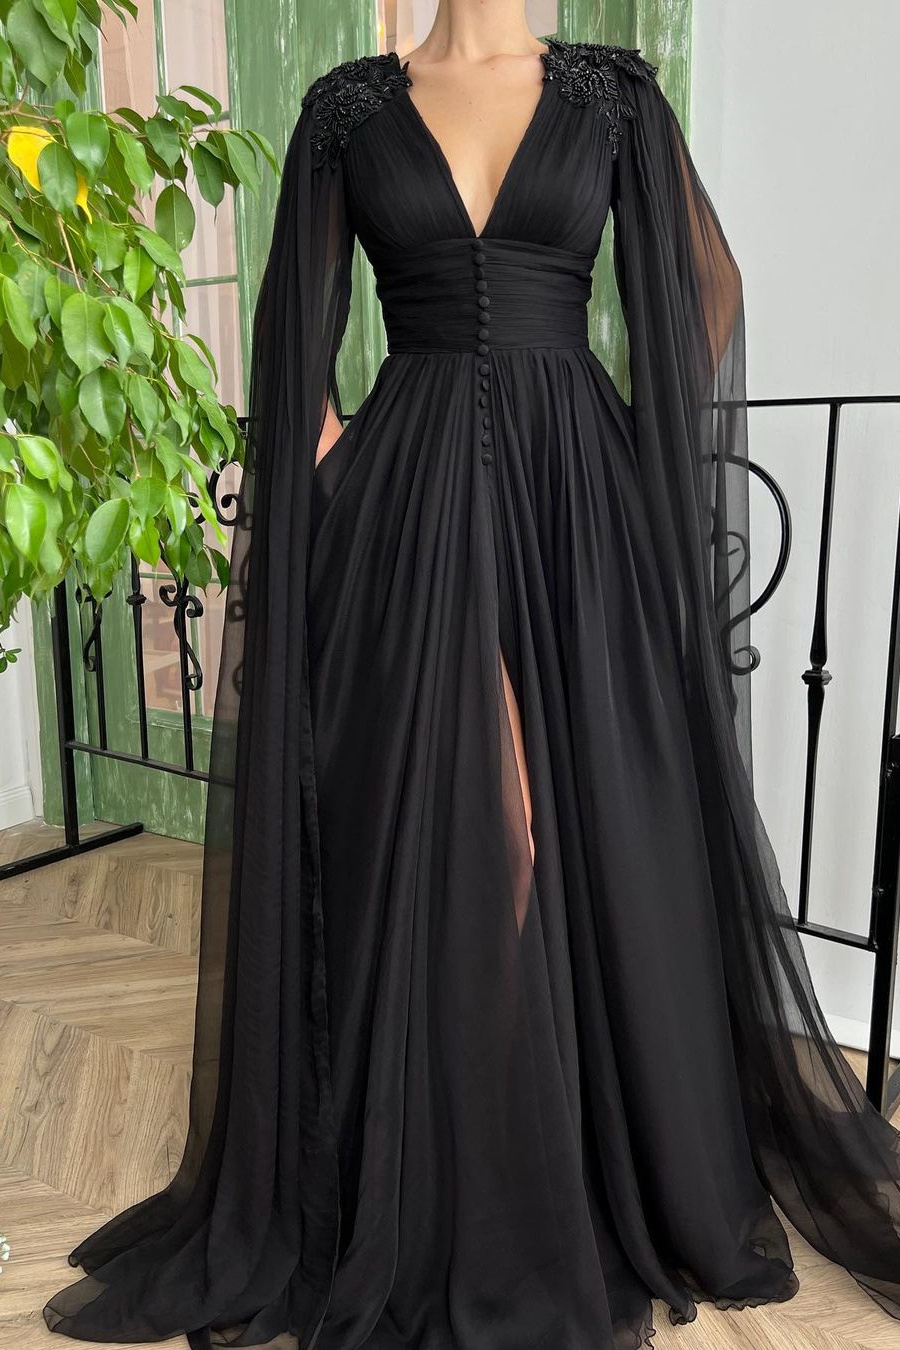 Dresseswow Black Ruffle Sleeves Prom Dress Long Slit With Buttons